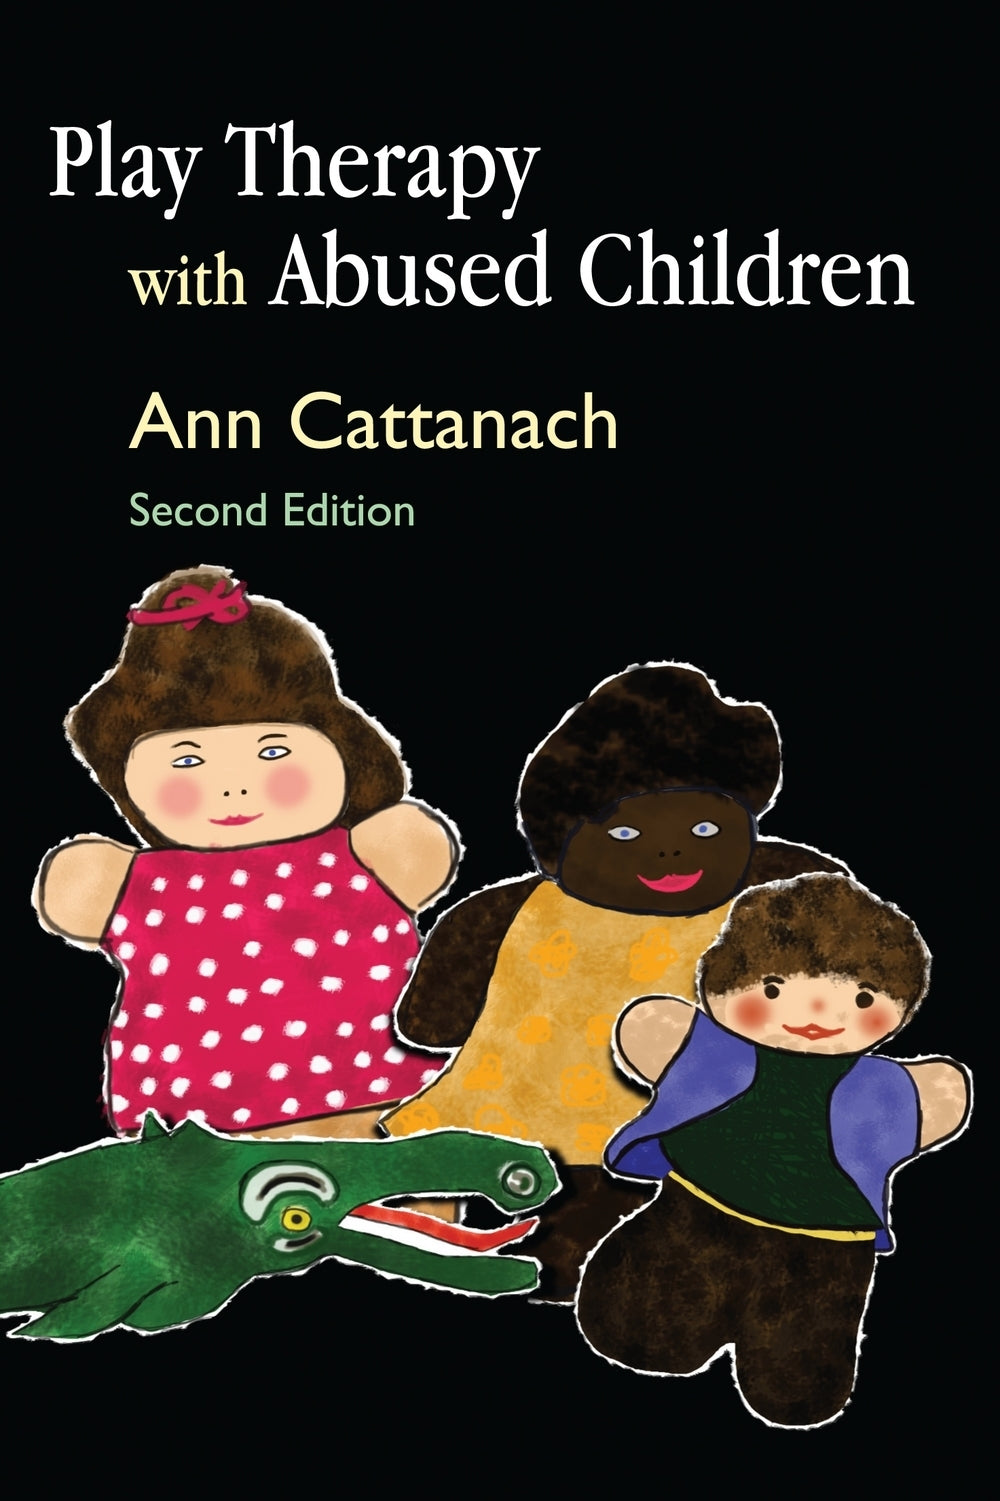 Play Therapy with Abused Children by Ann Cattanach